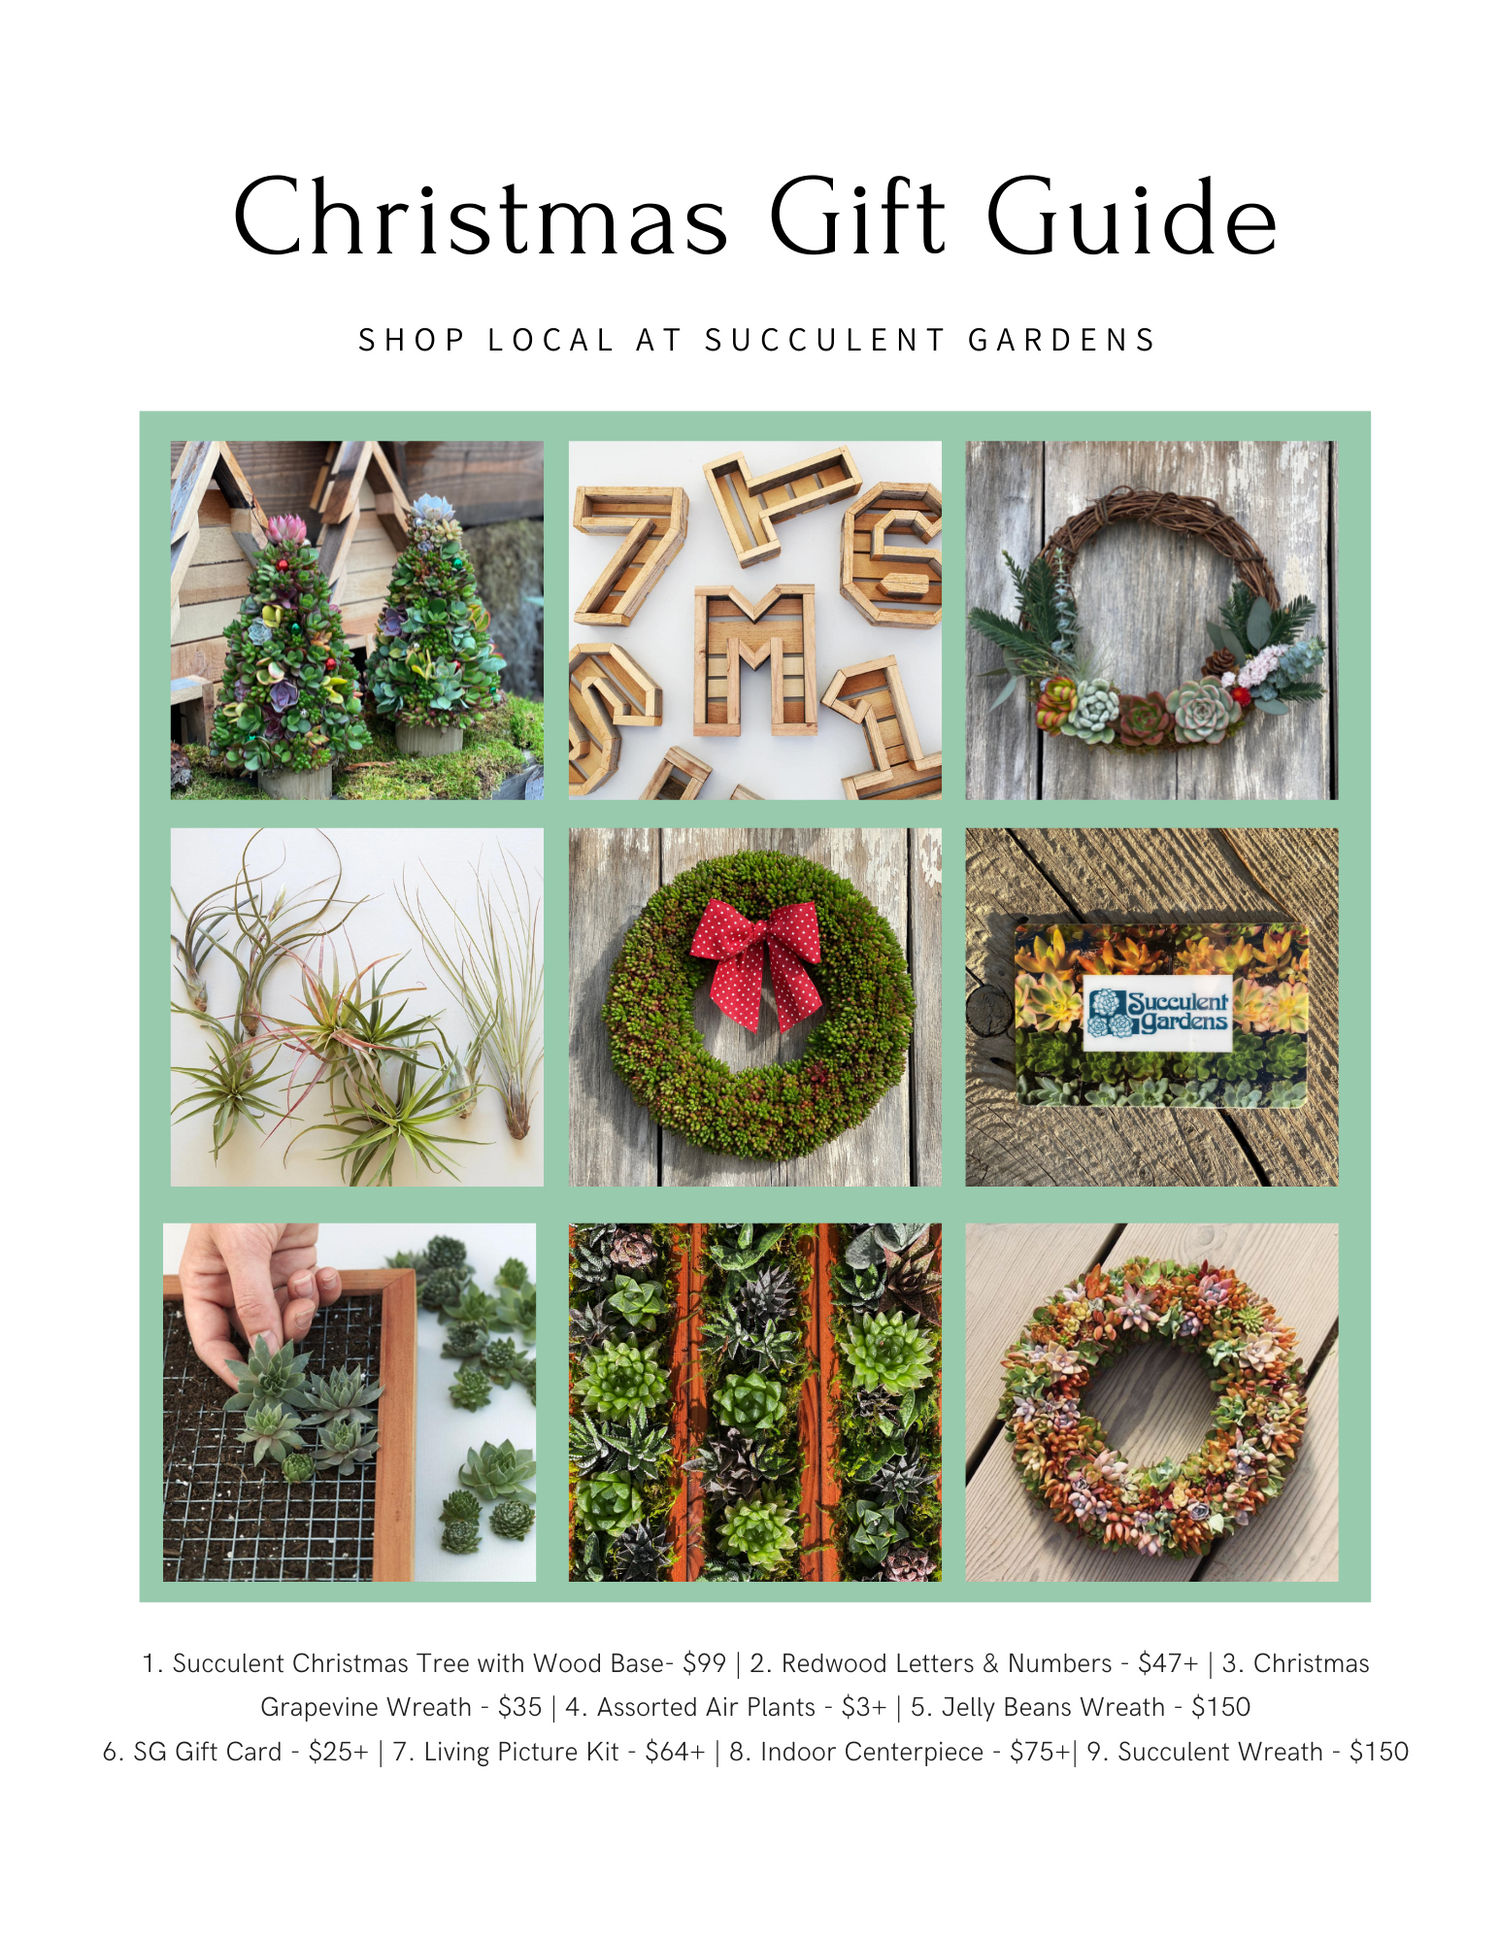 Succulent Gardens Christmas Gift Guide